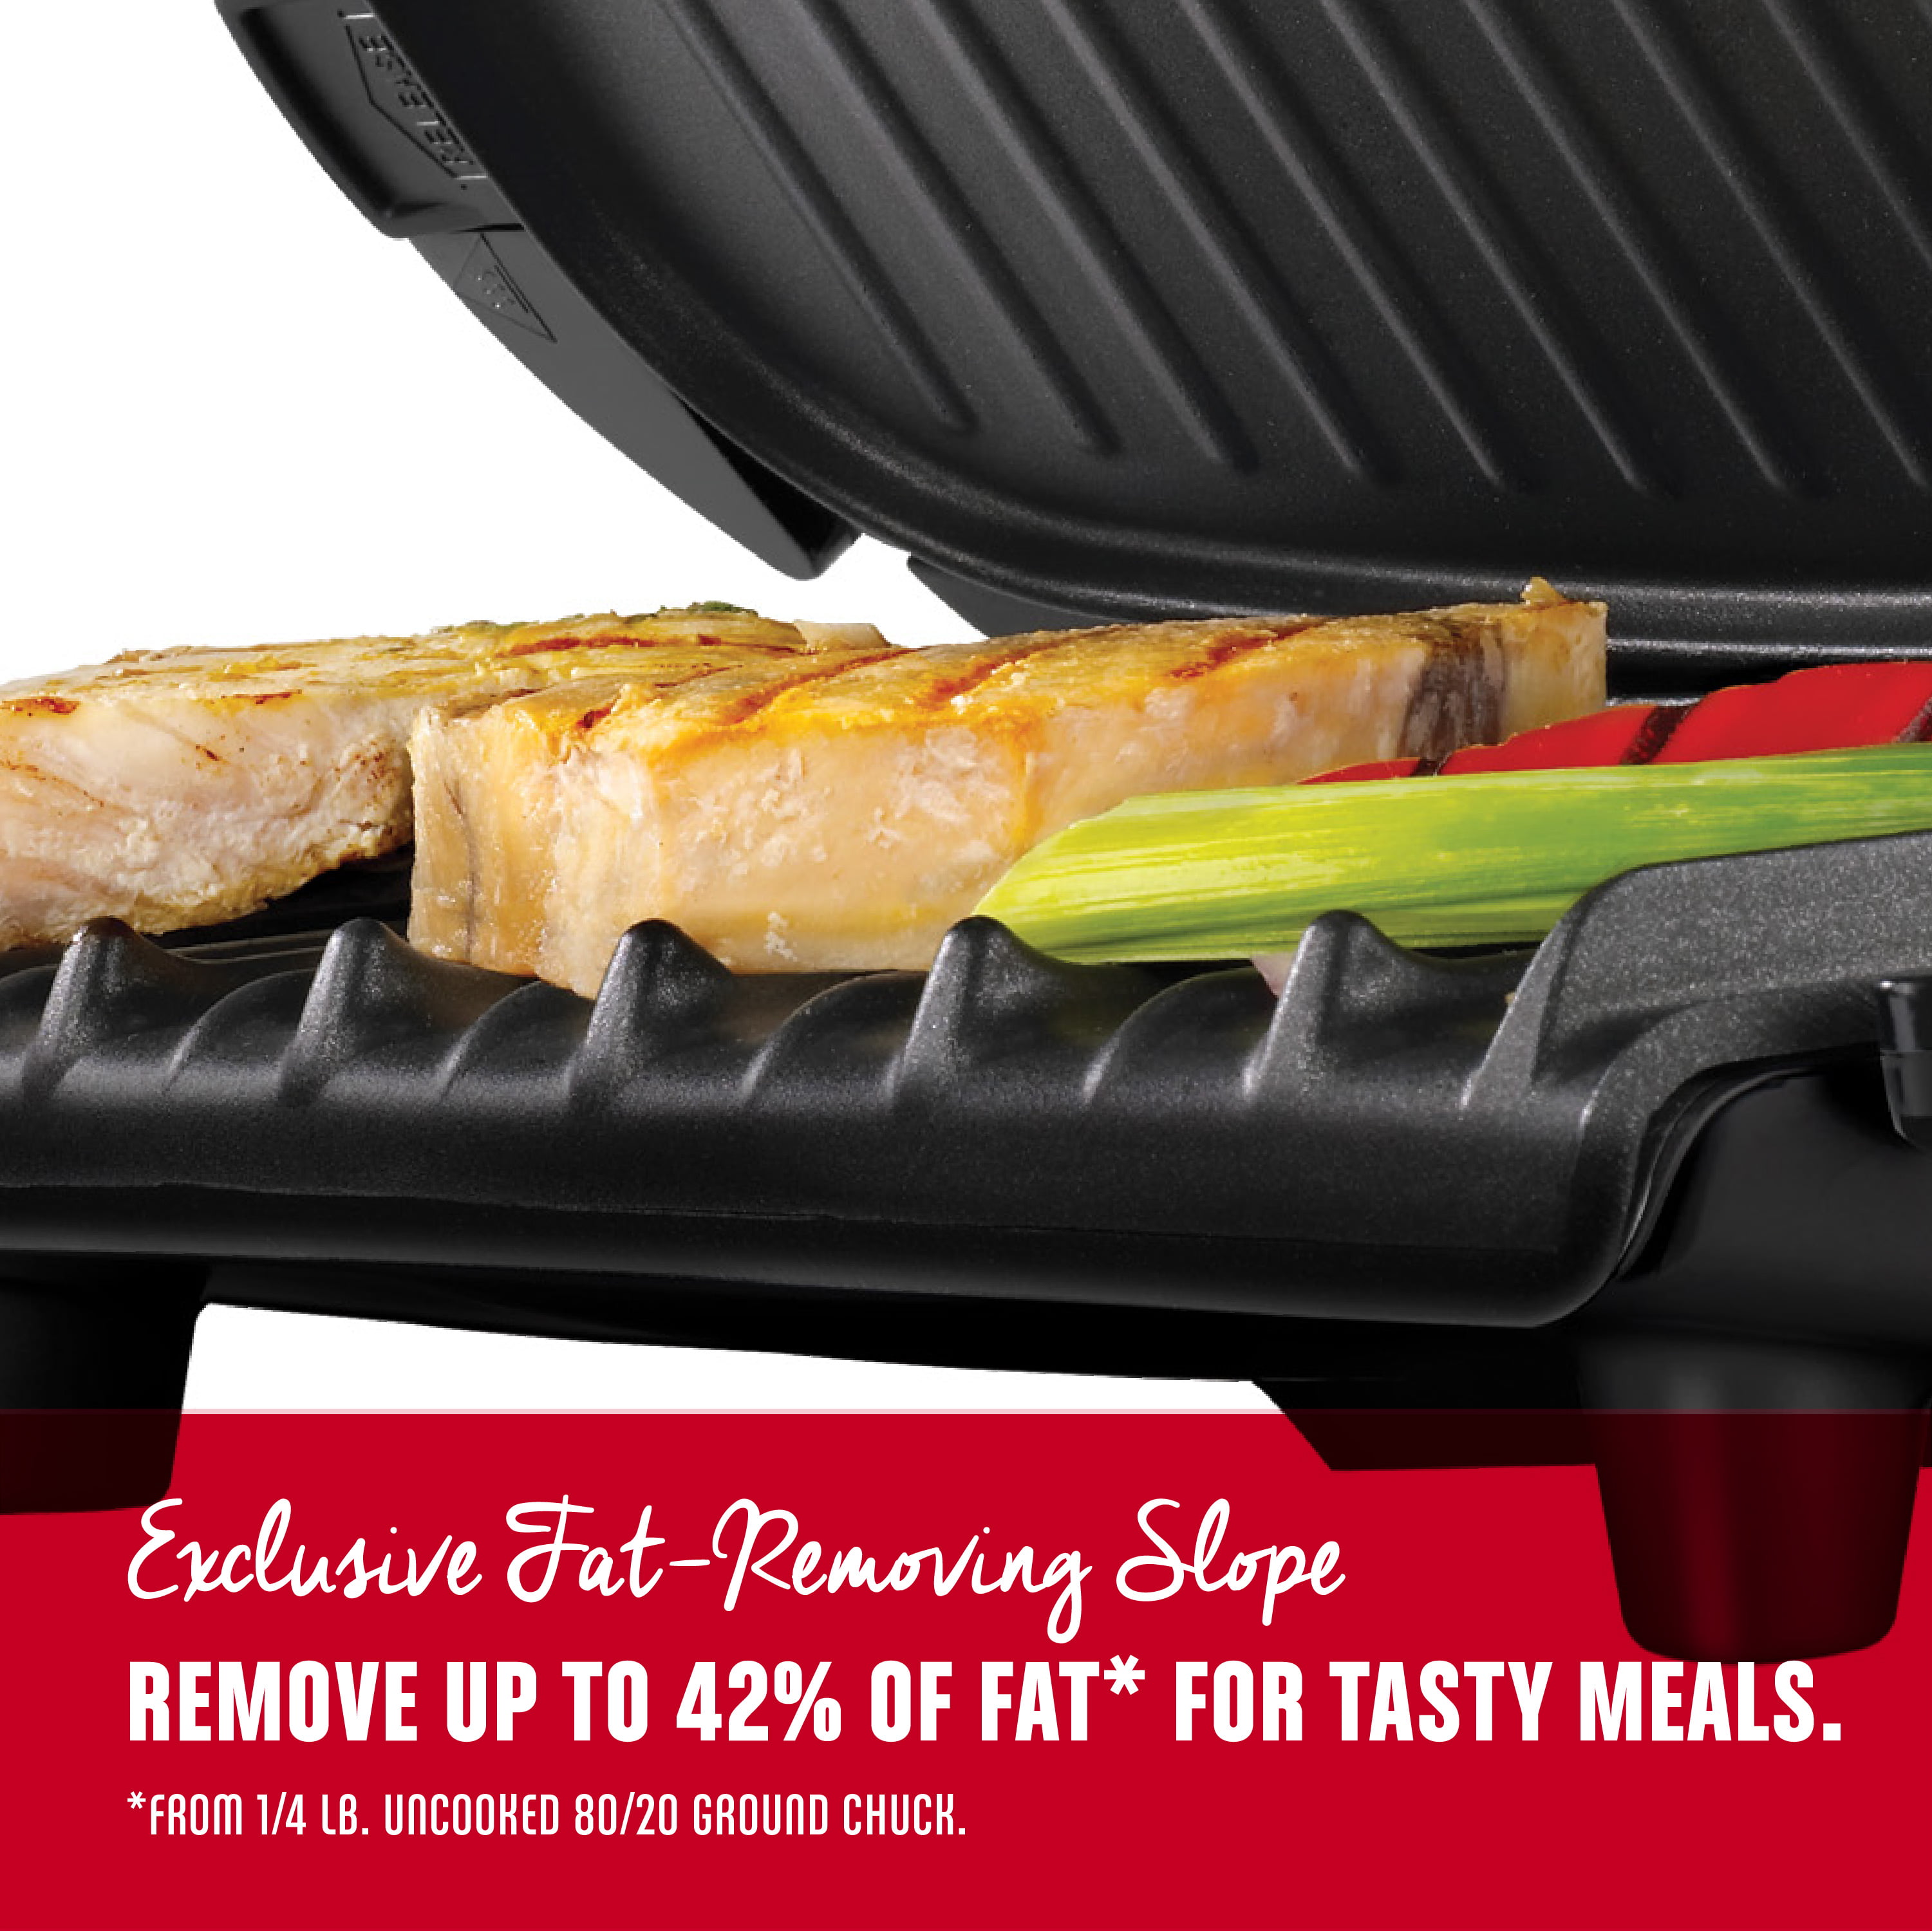 The George Foreman Removable Plate Grill Is Just $29